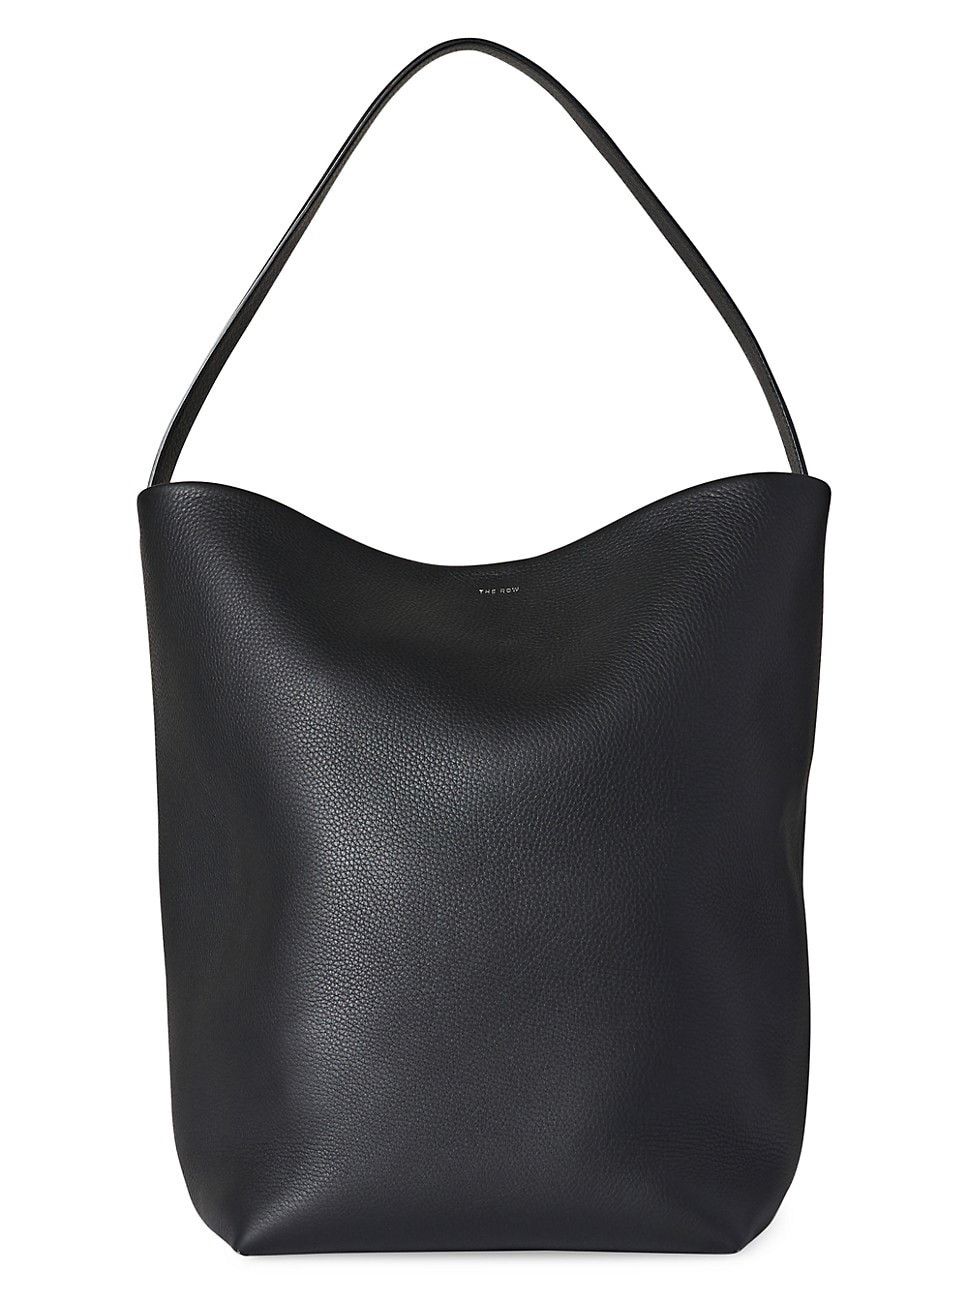 Park Leather Tote | Saks Fifth Avenue